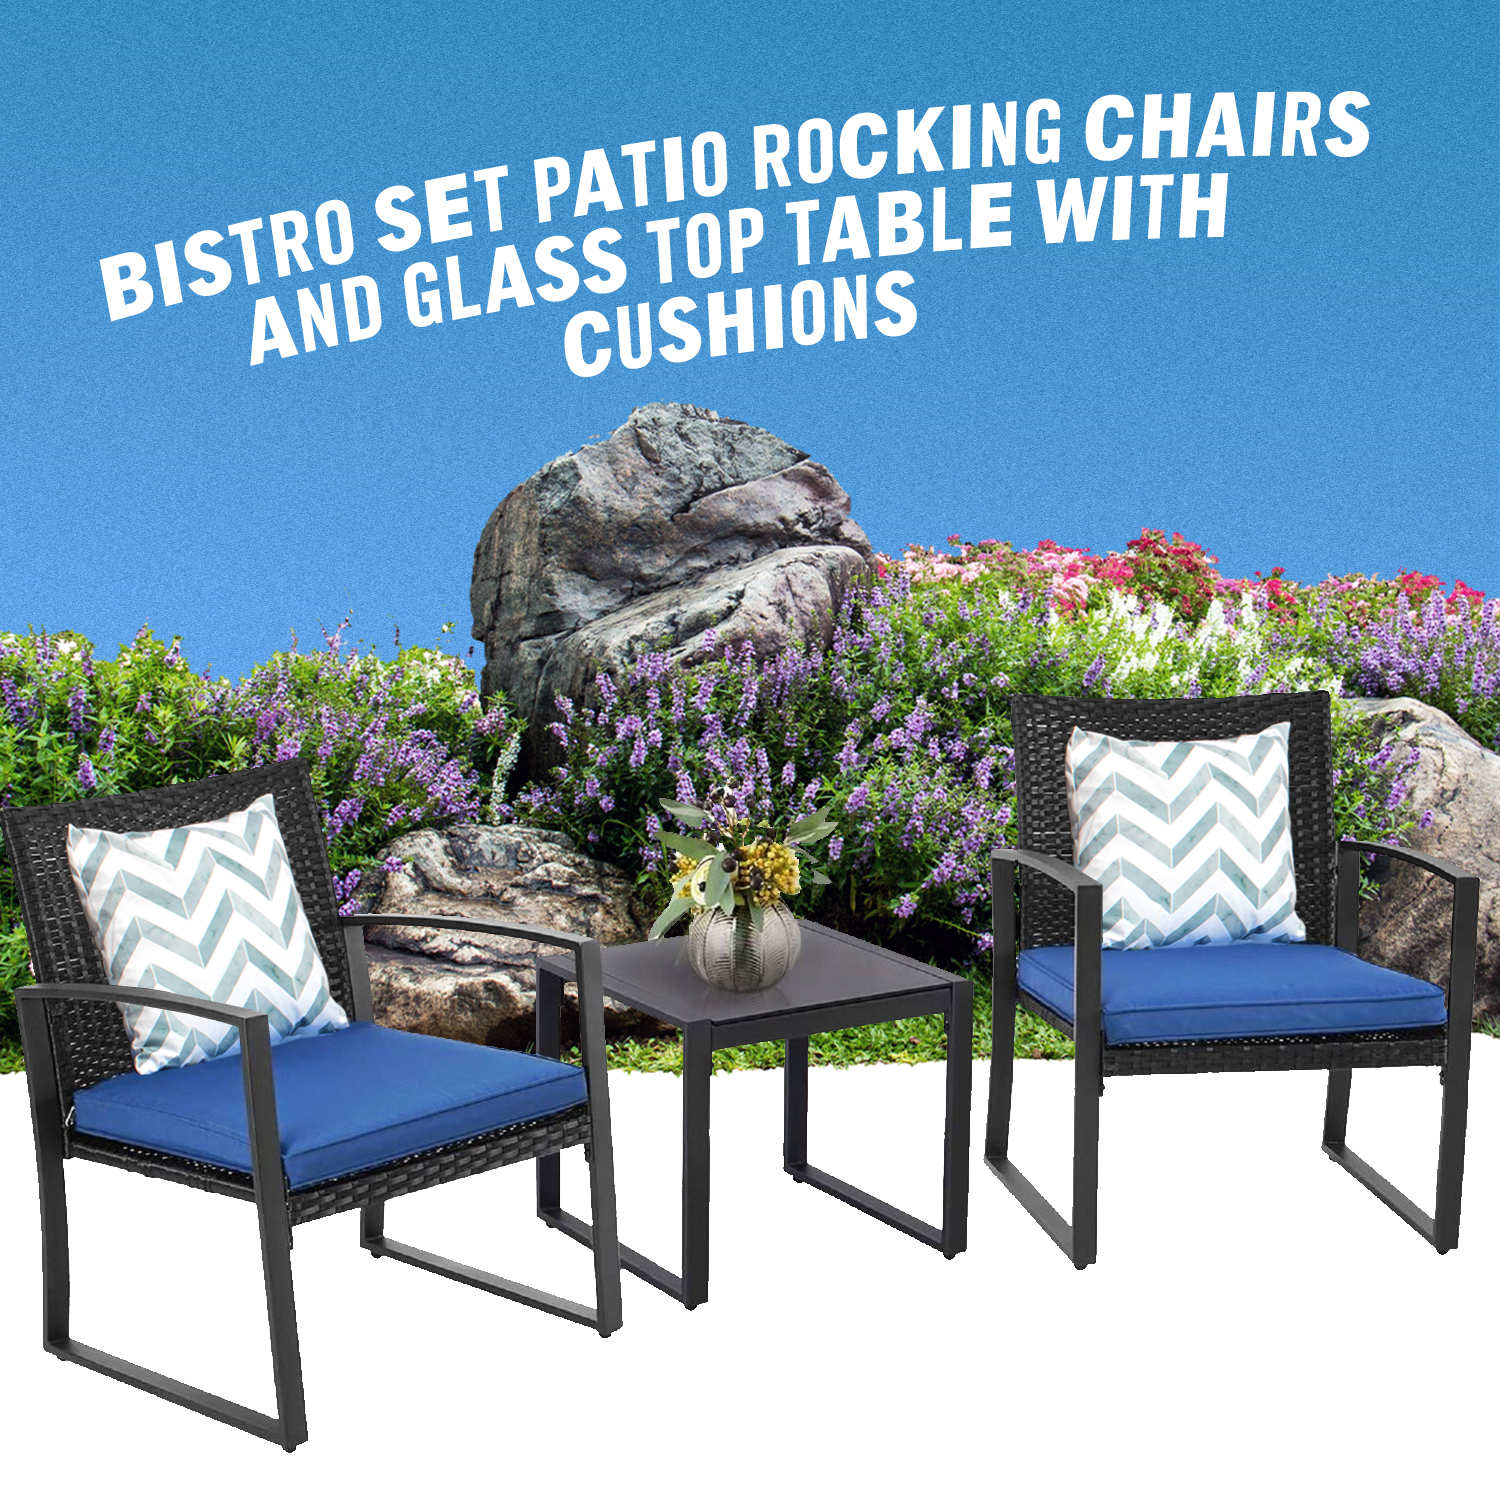 3 Pieces recreational Wicker garden furniture Sets Modern Bistro Set Rattan Chair dialogue Sets with Yard and Bistro Coffee Table - image 3 of 7